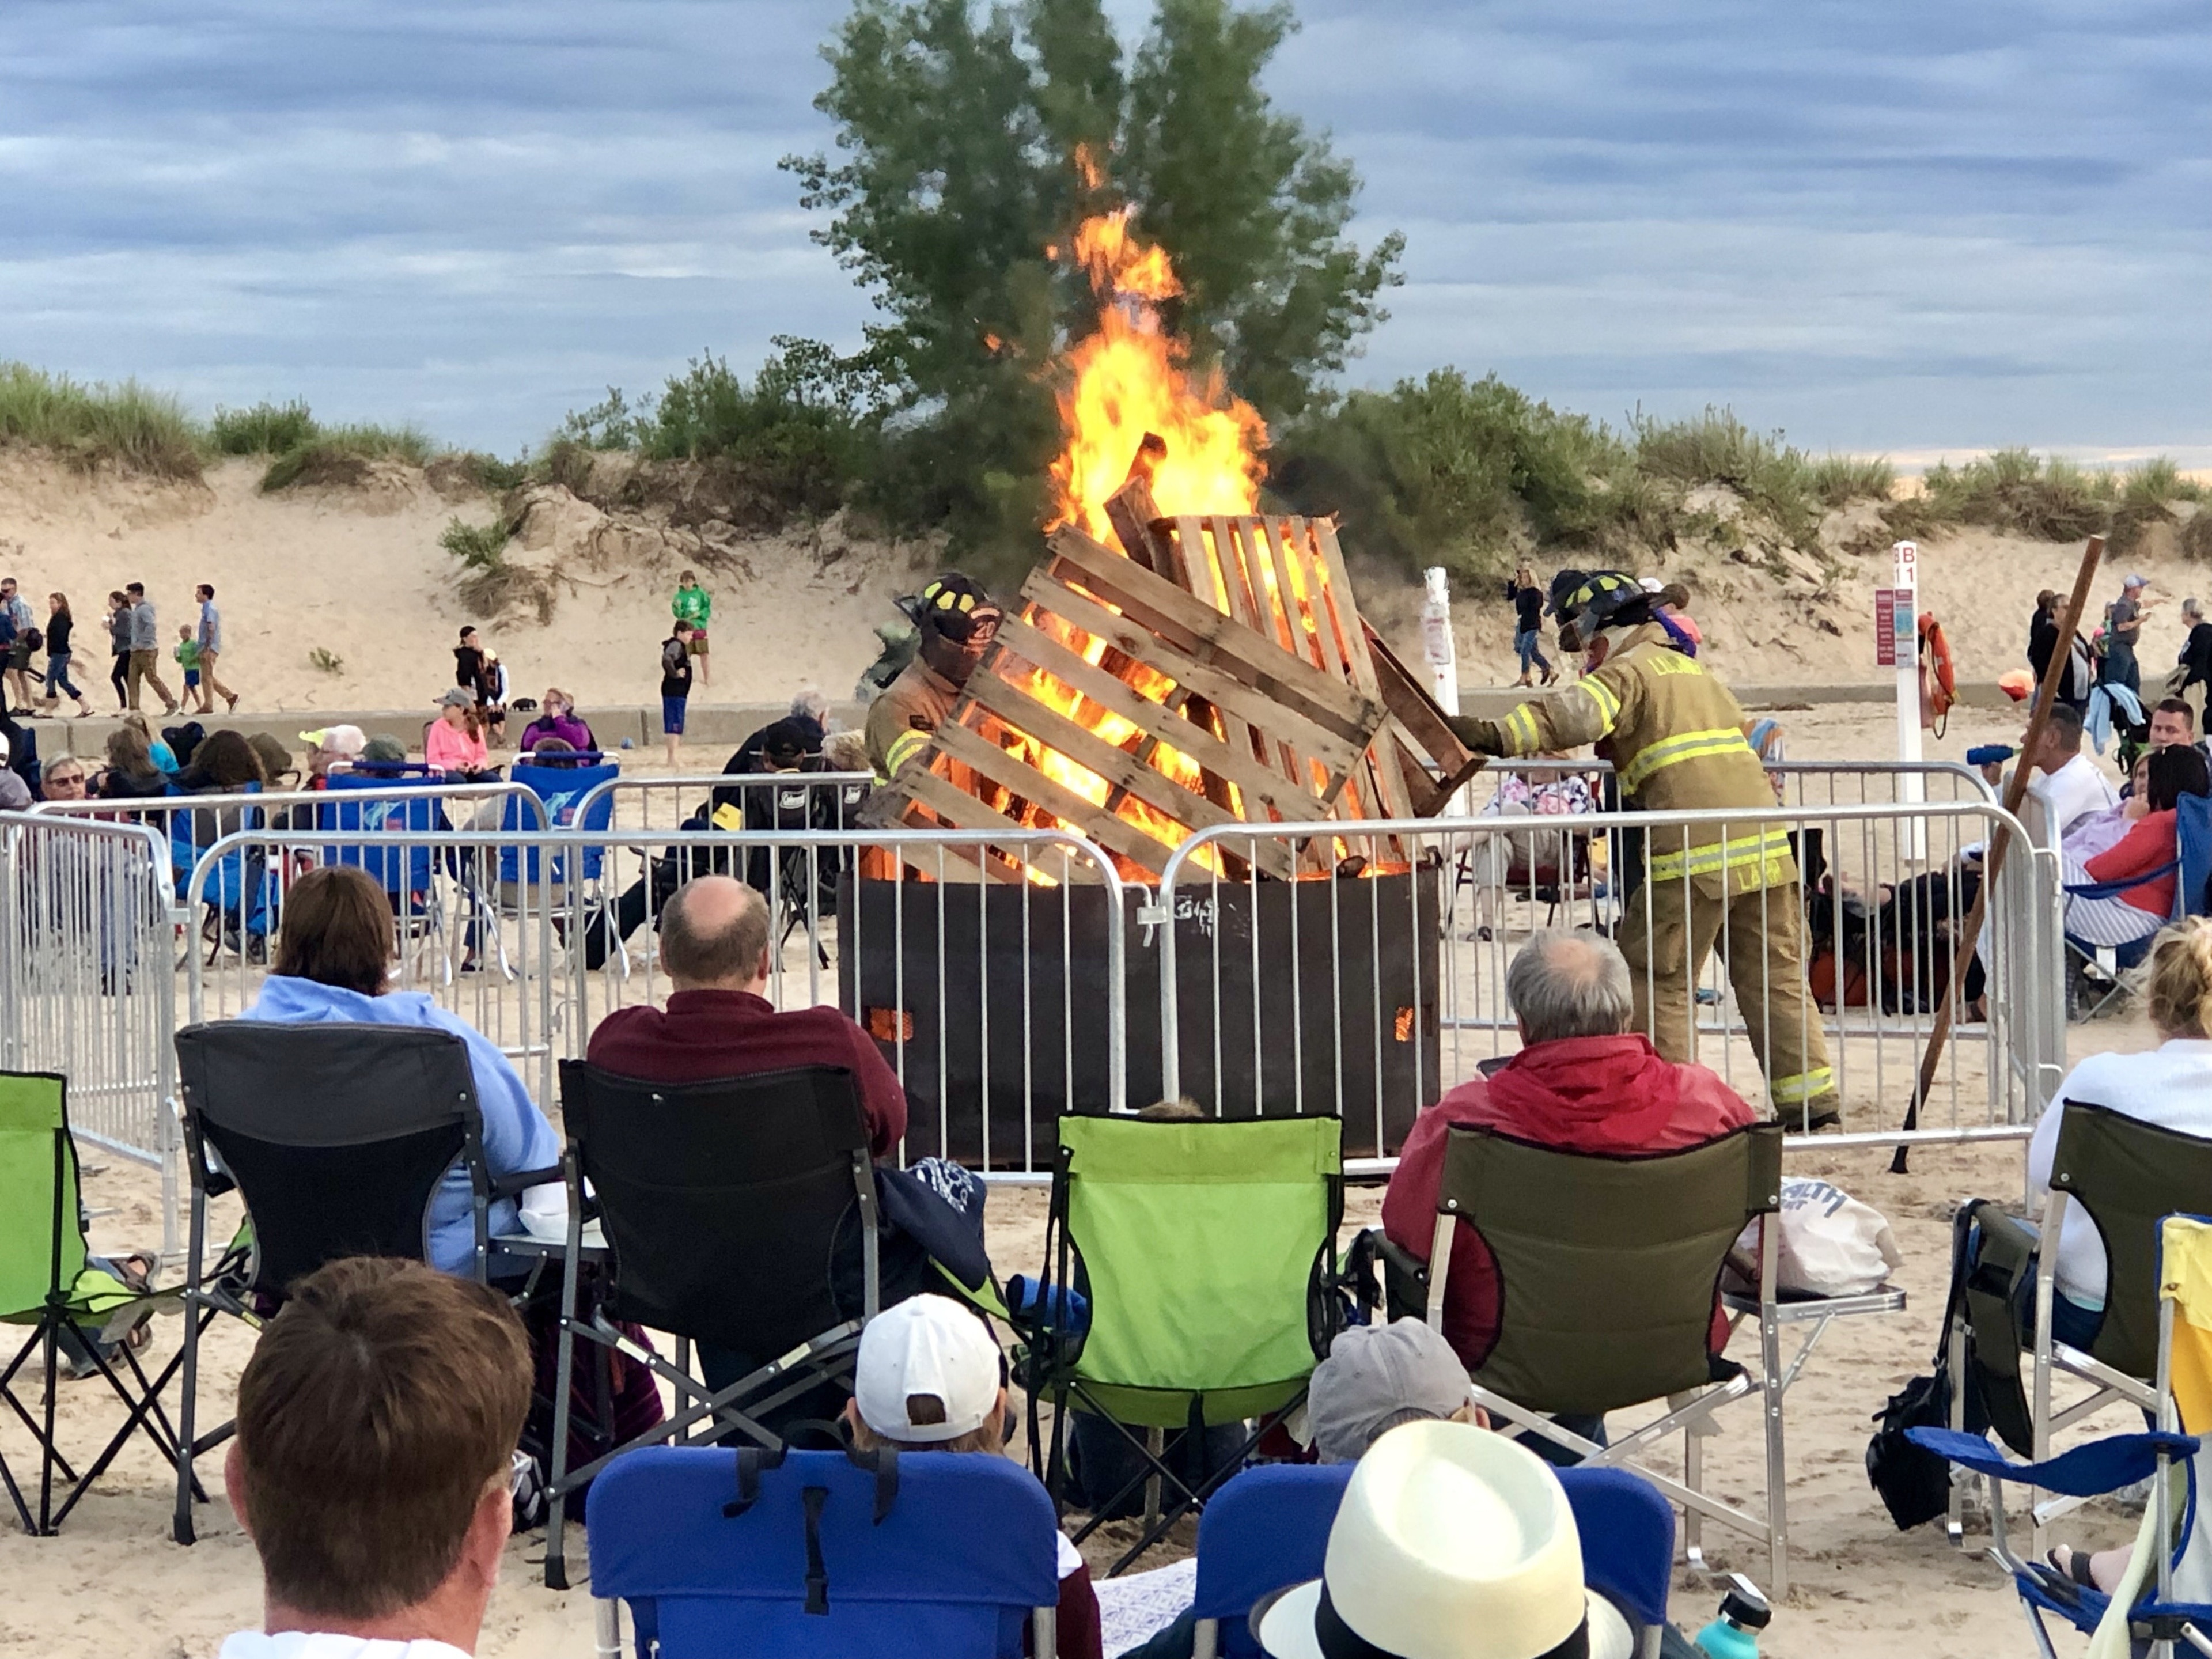 The city of Ludington hosts a monthly bonfire on the beach from 8-10pm during the summer. It is timed to be able to take in the sunset as well as the departure of the car ferry SS Badger.